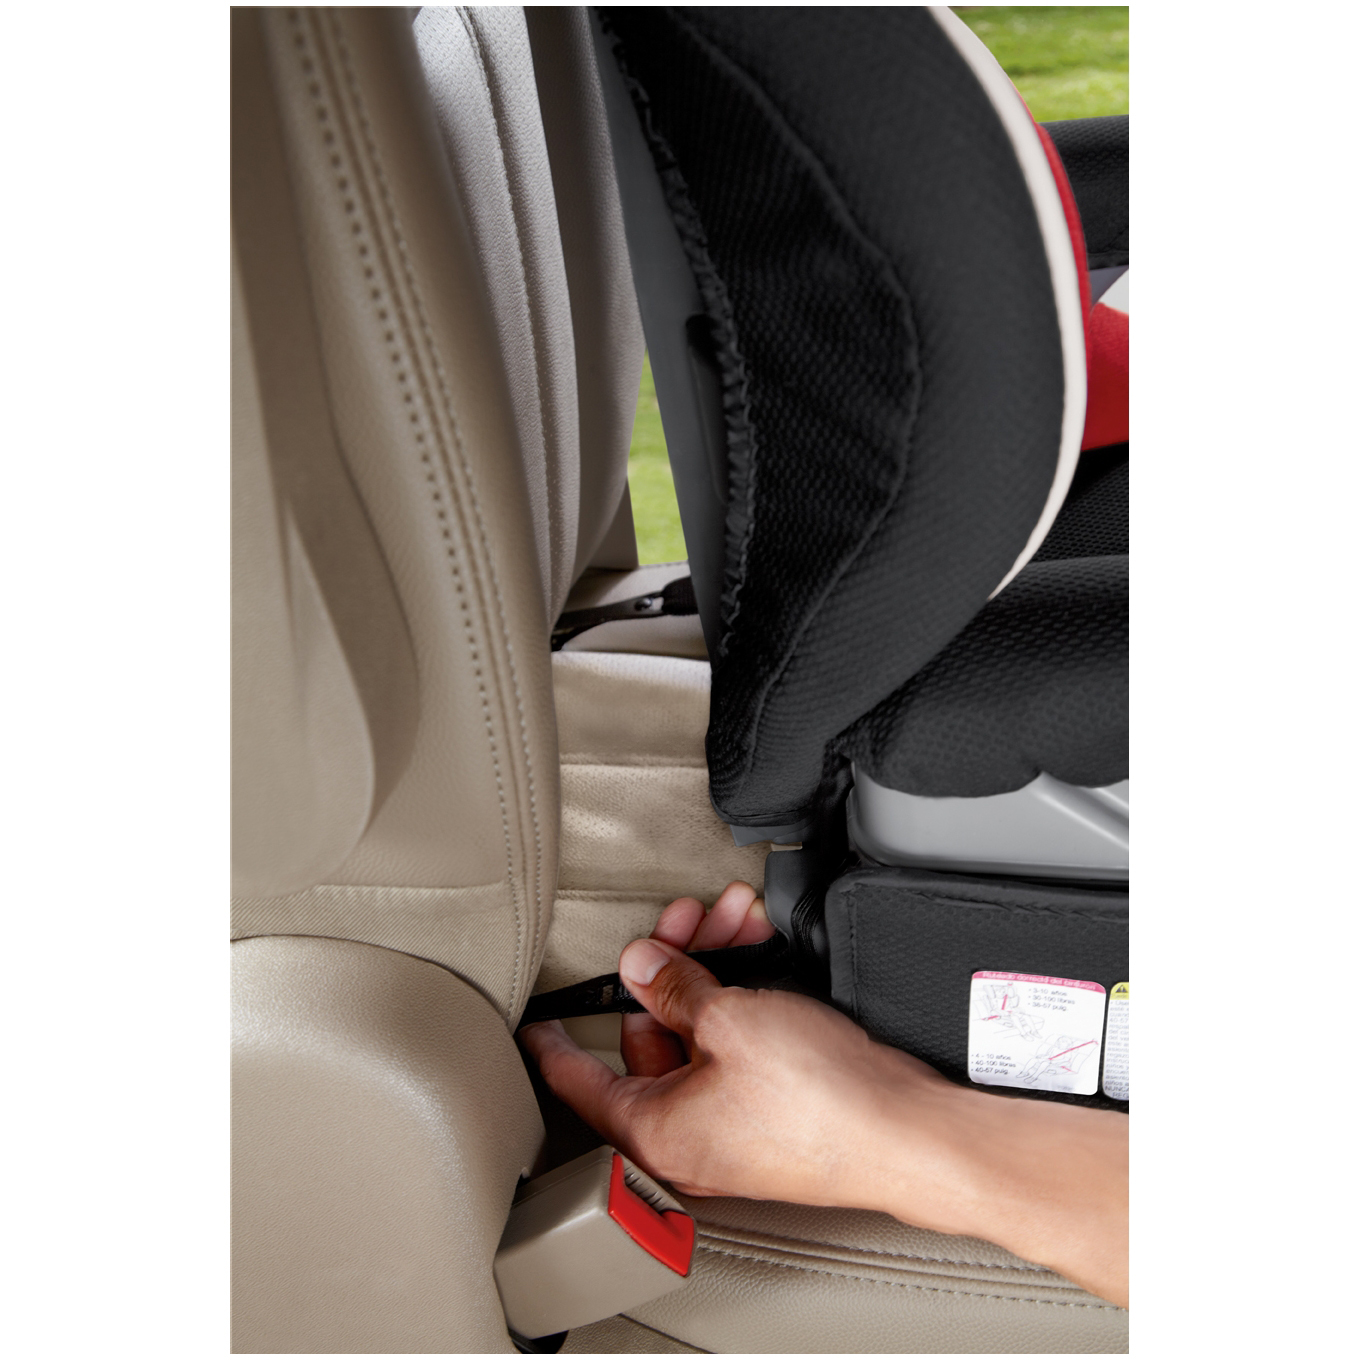 Graco Affix Highback Forward Facing Booster Car Seat with Latch System,  Atomic